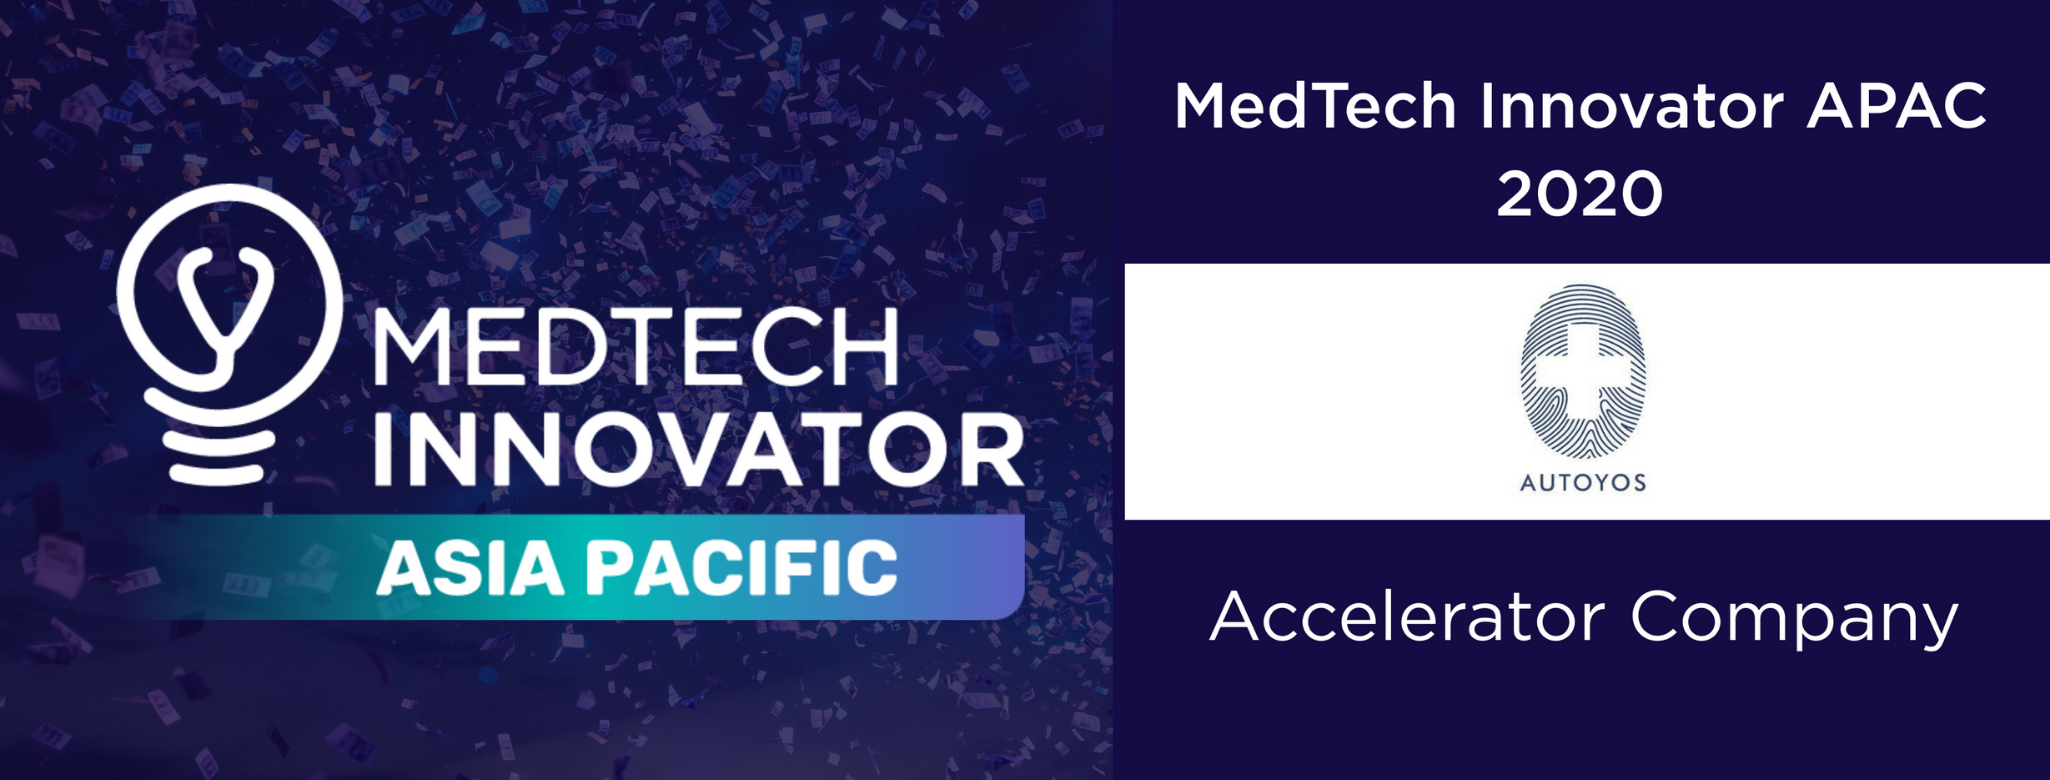 Asia Pacific Top 20 Medtech Innovator